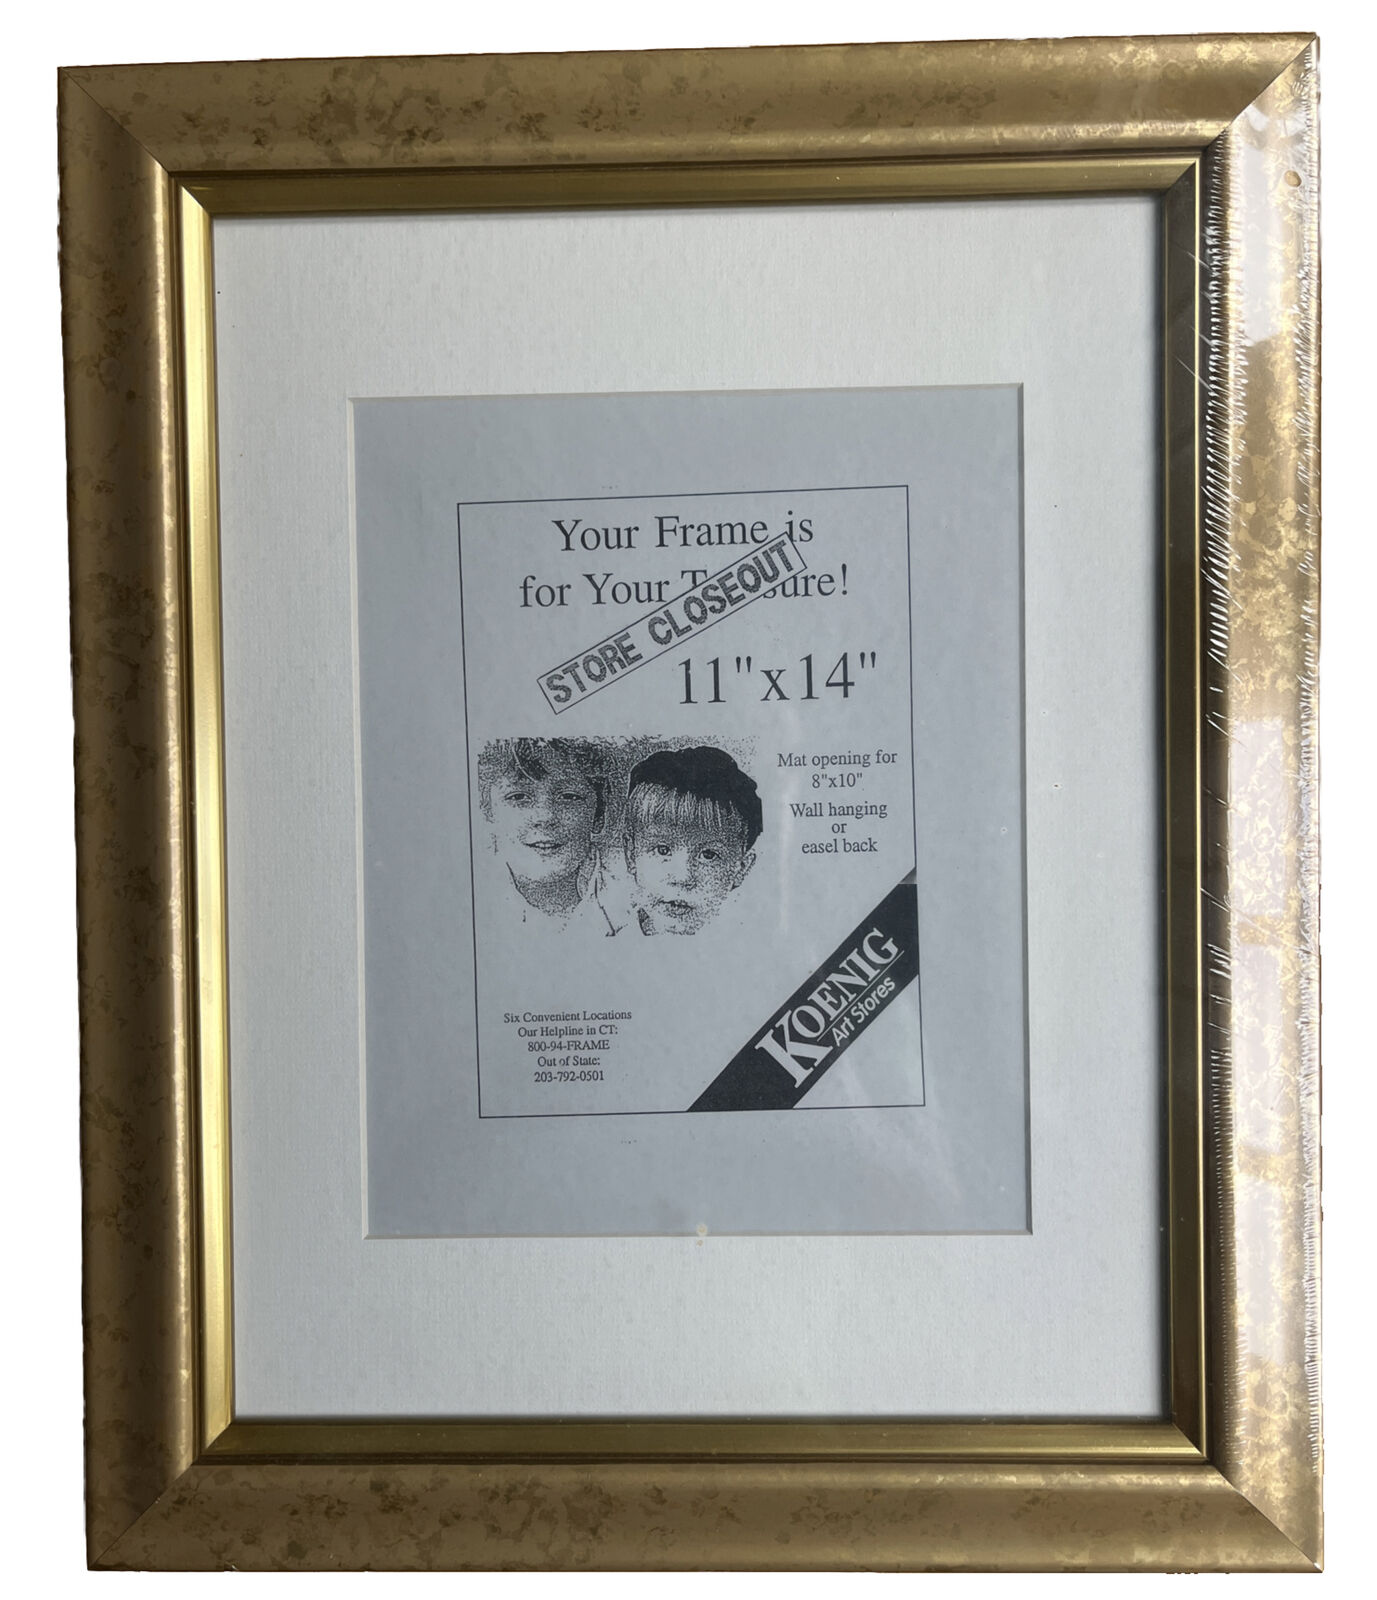 New 11x14 Picture Frame Gold Gilt